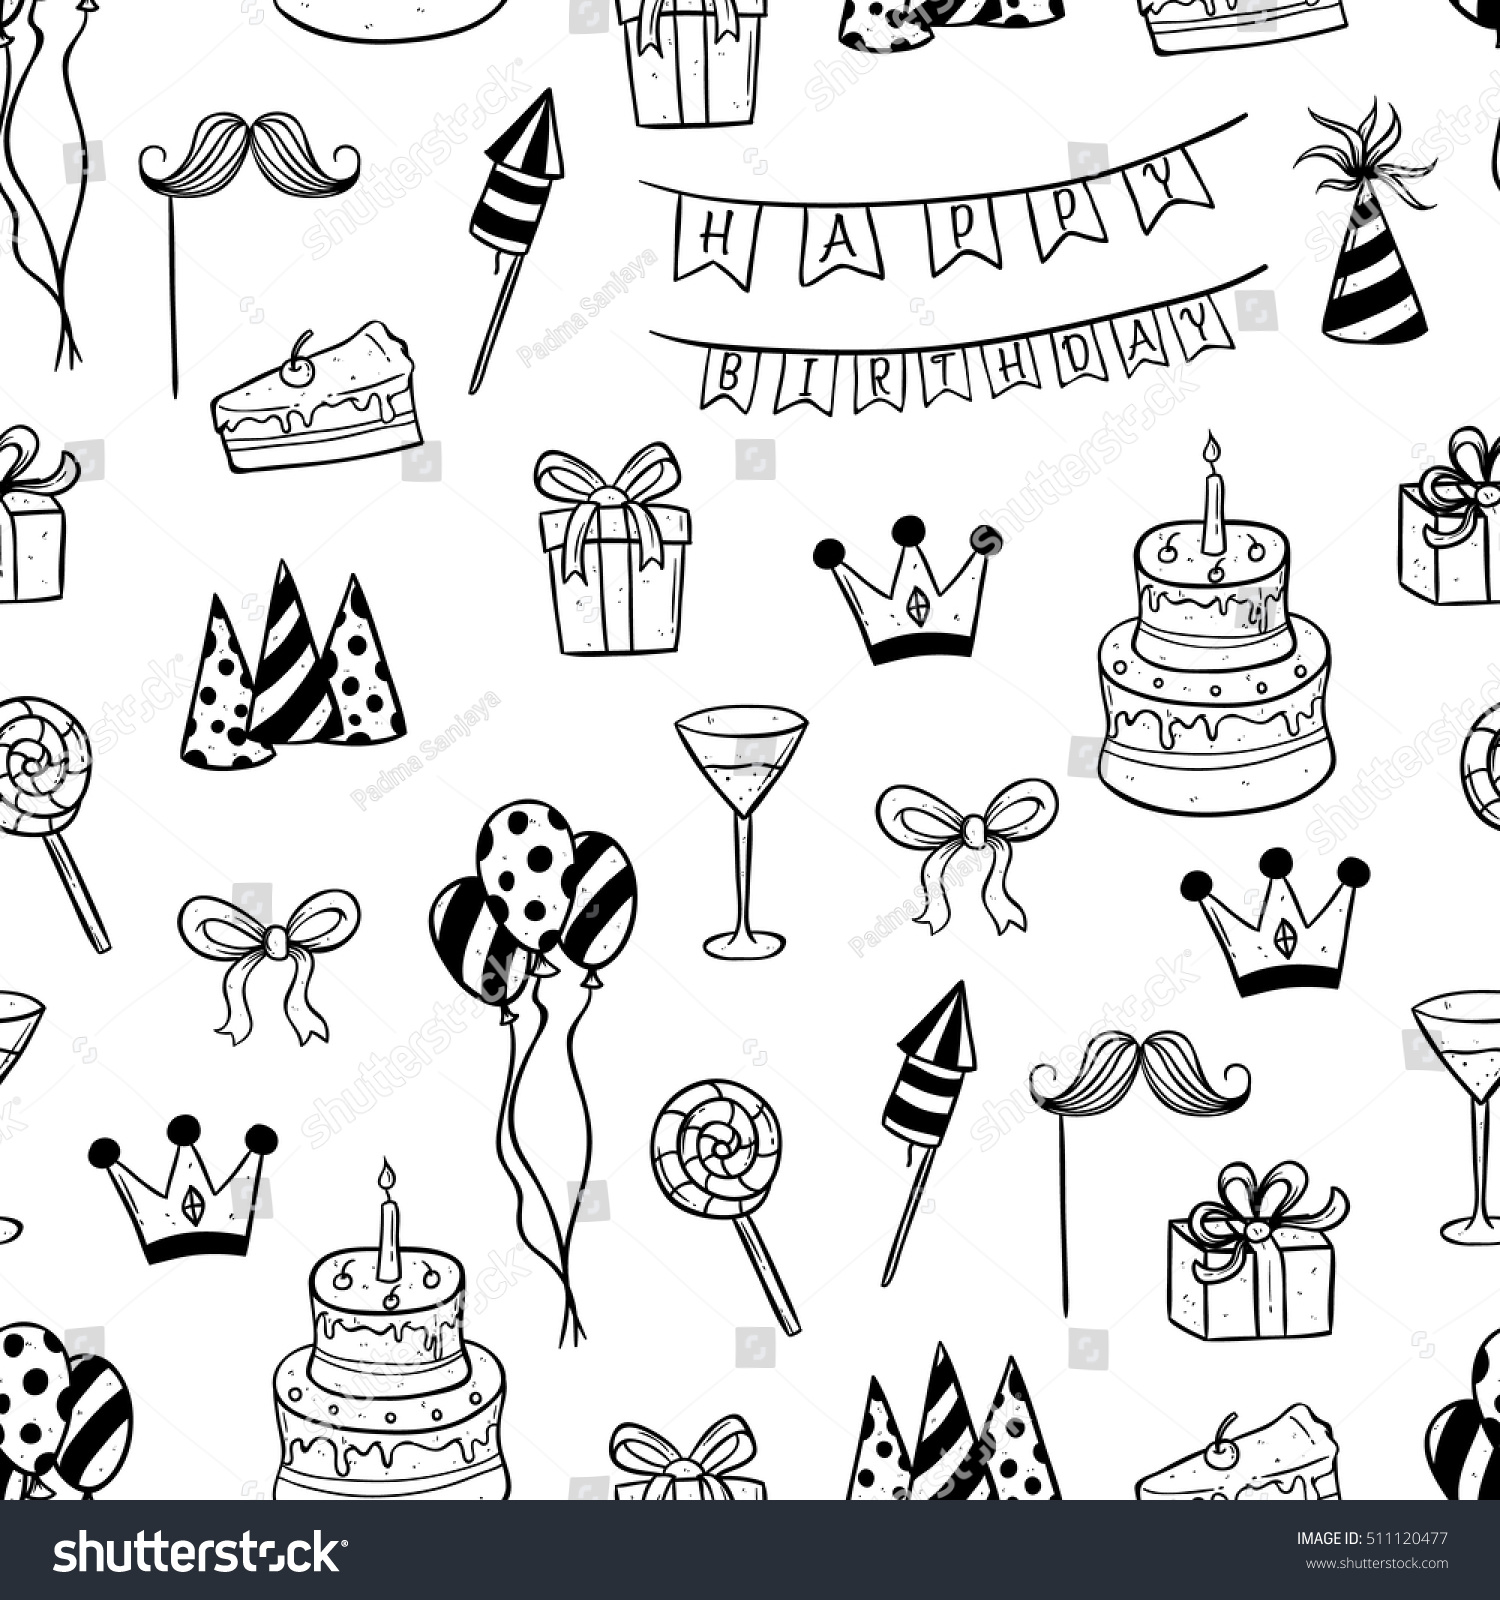 Cute Birthday Elements Seamless Pattern Using Stock Vector Royalty